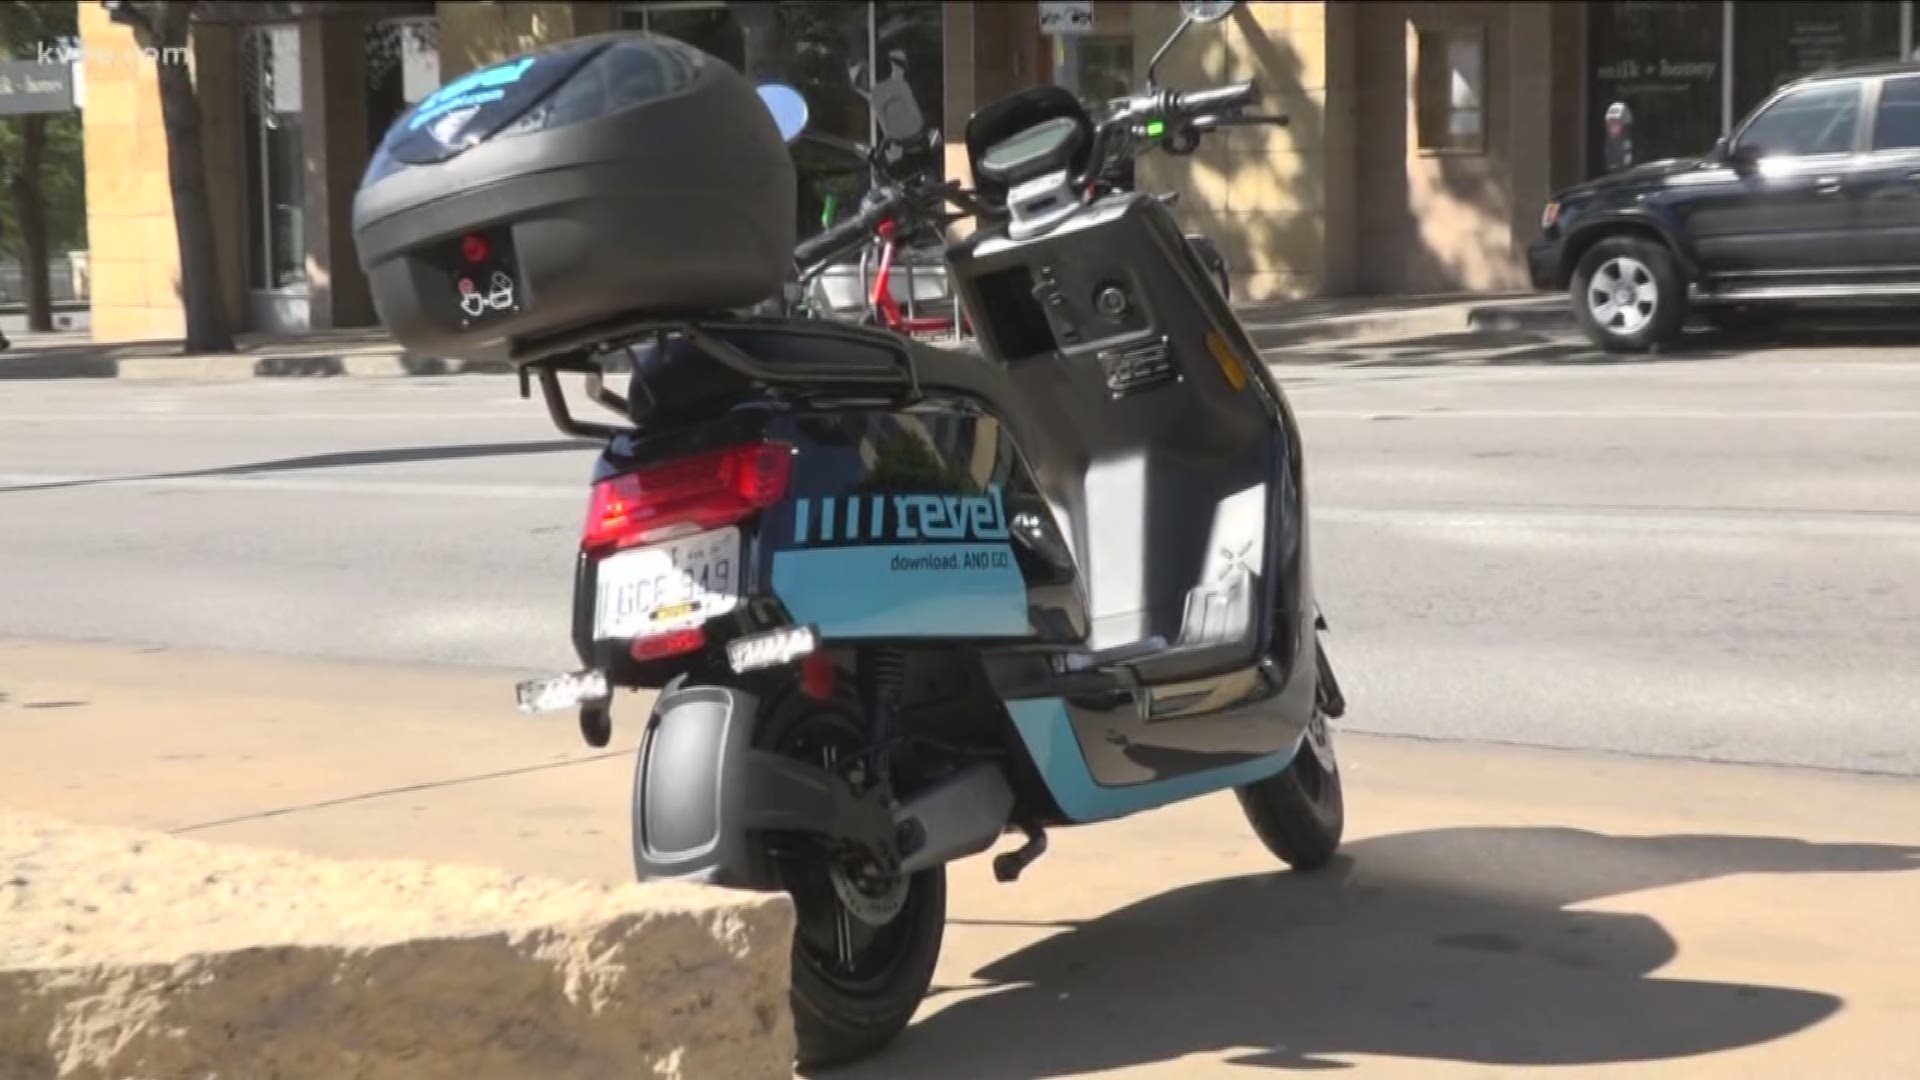 These are completely different from the scooters your're used to seeing on the streets of Austin already.